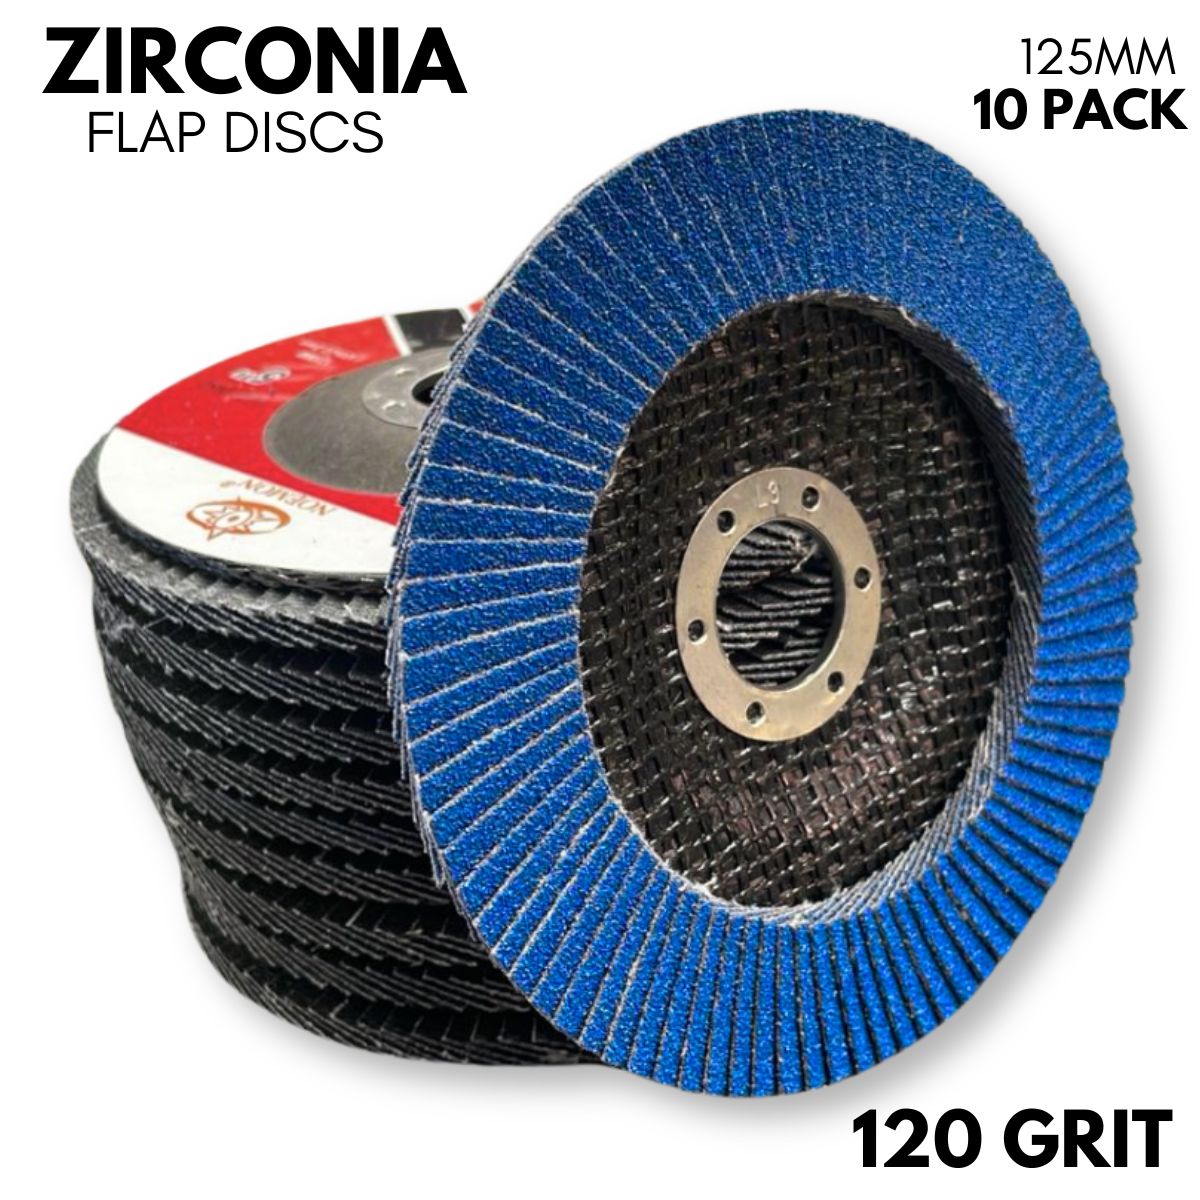 10 Pack | 125mm (5”) Flap Discs | 120 GRIT Zirconia - South East Clearance Centre